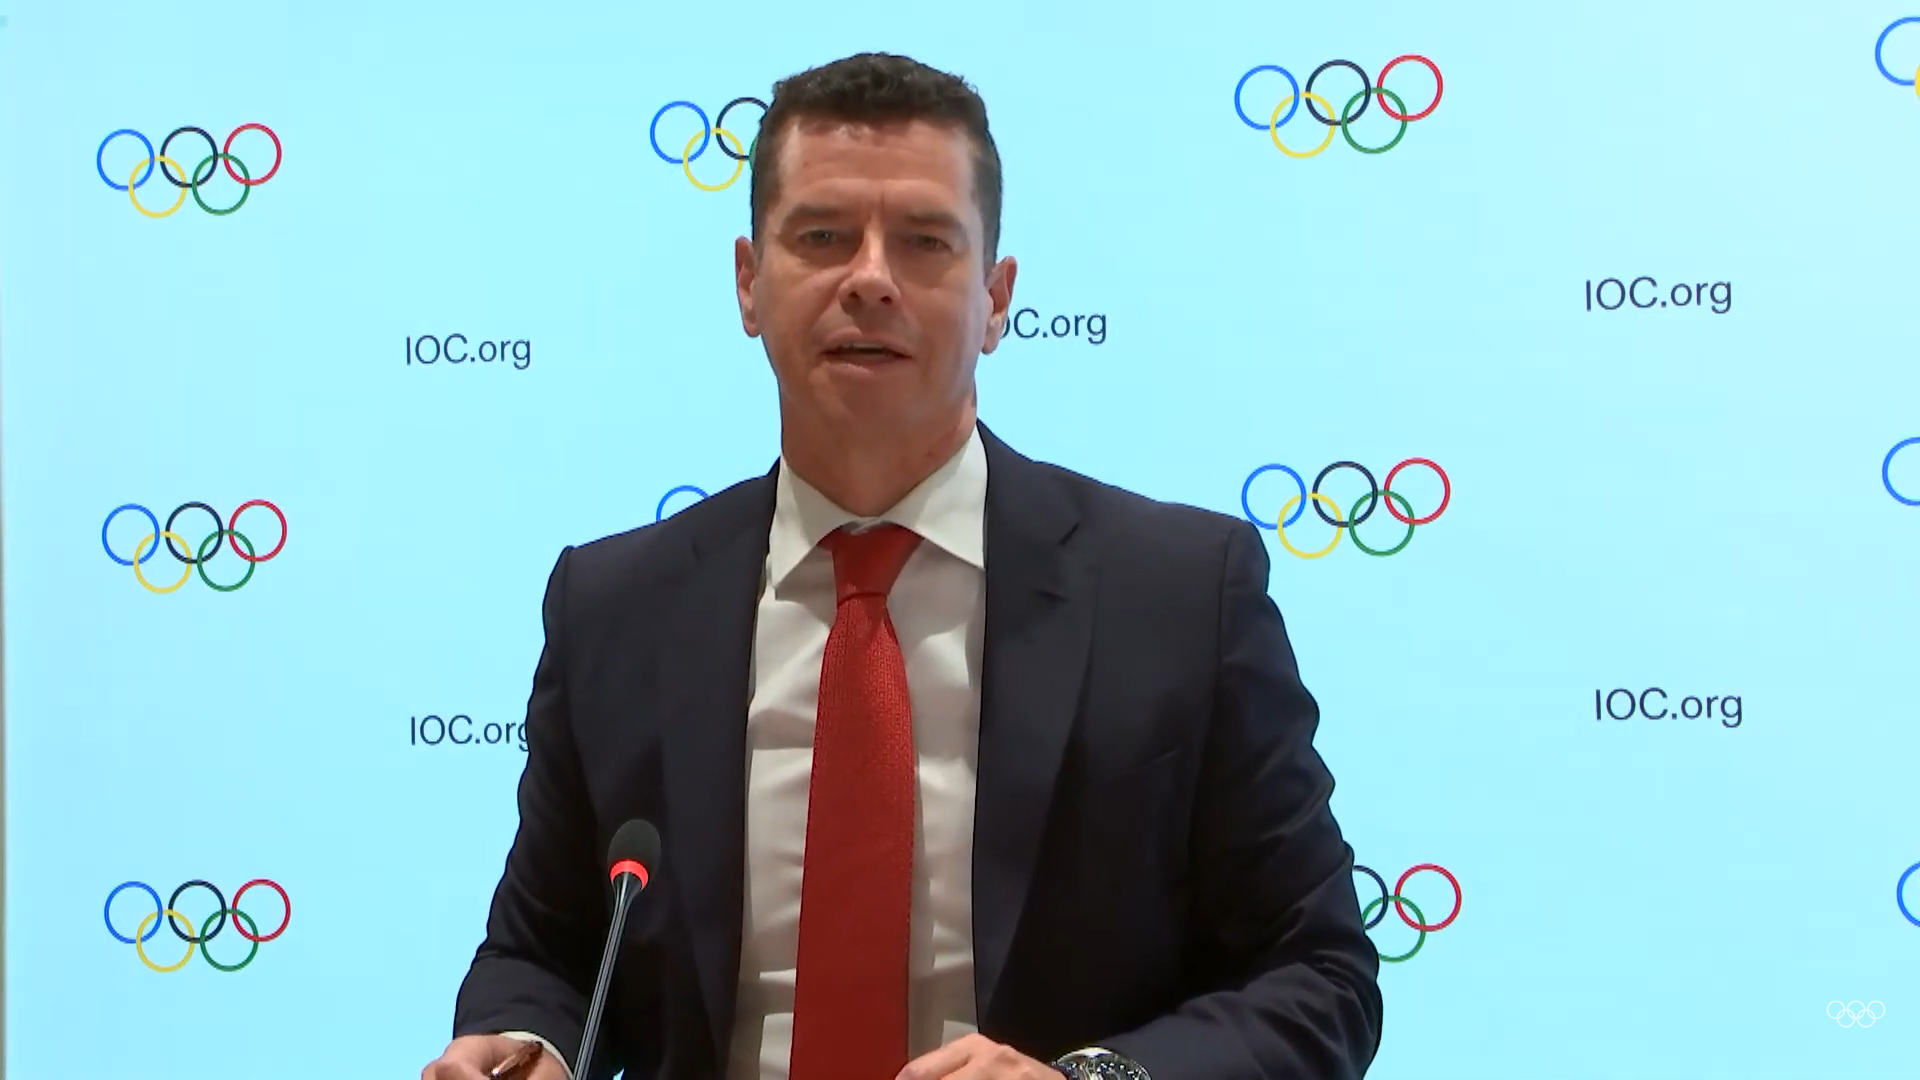 IOC sports director Kit McConnell said the qualification system for Paris 2024 